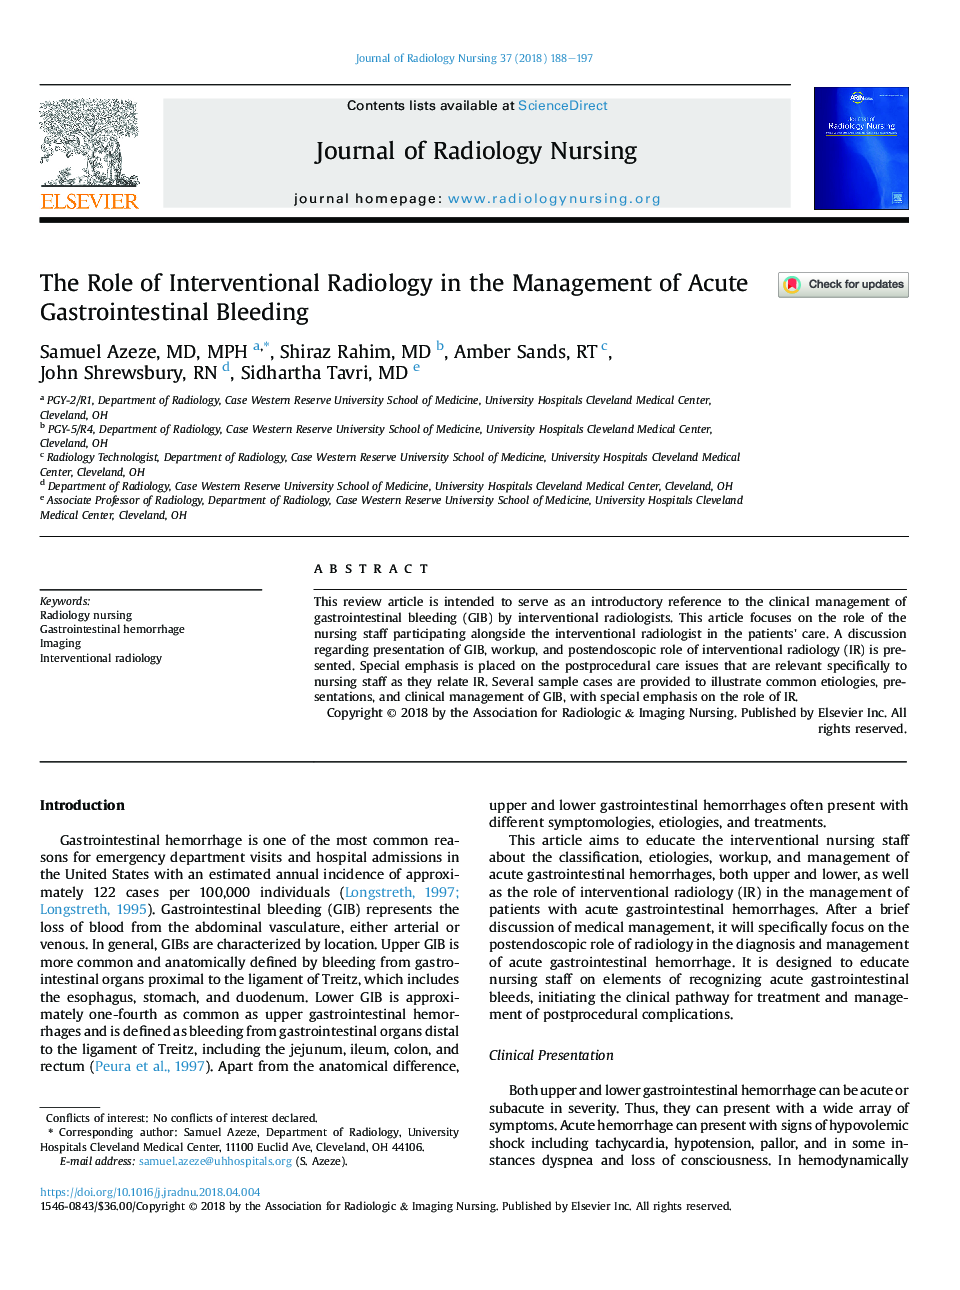 The Role of Interventional Radiology in the Management of Acute Gastrointestinal Bleeding